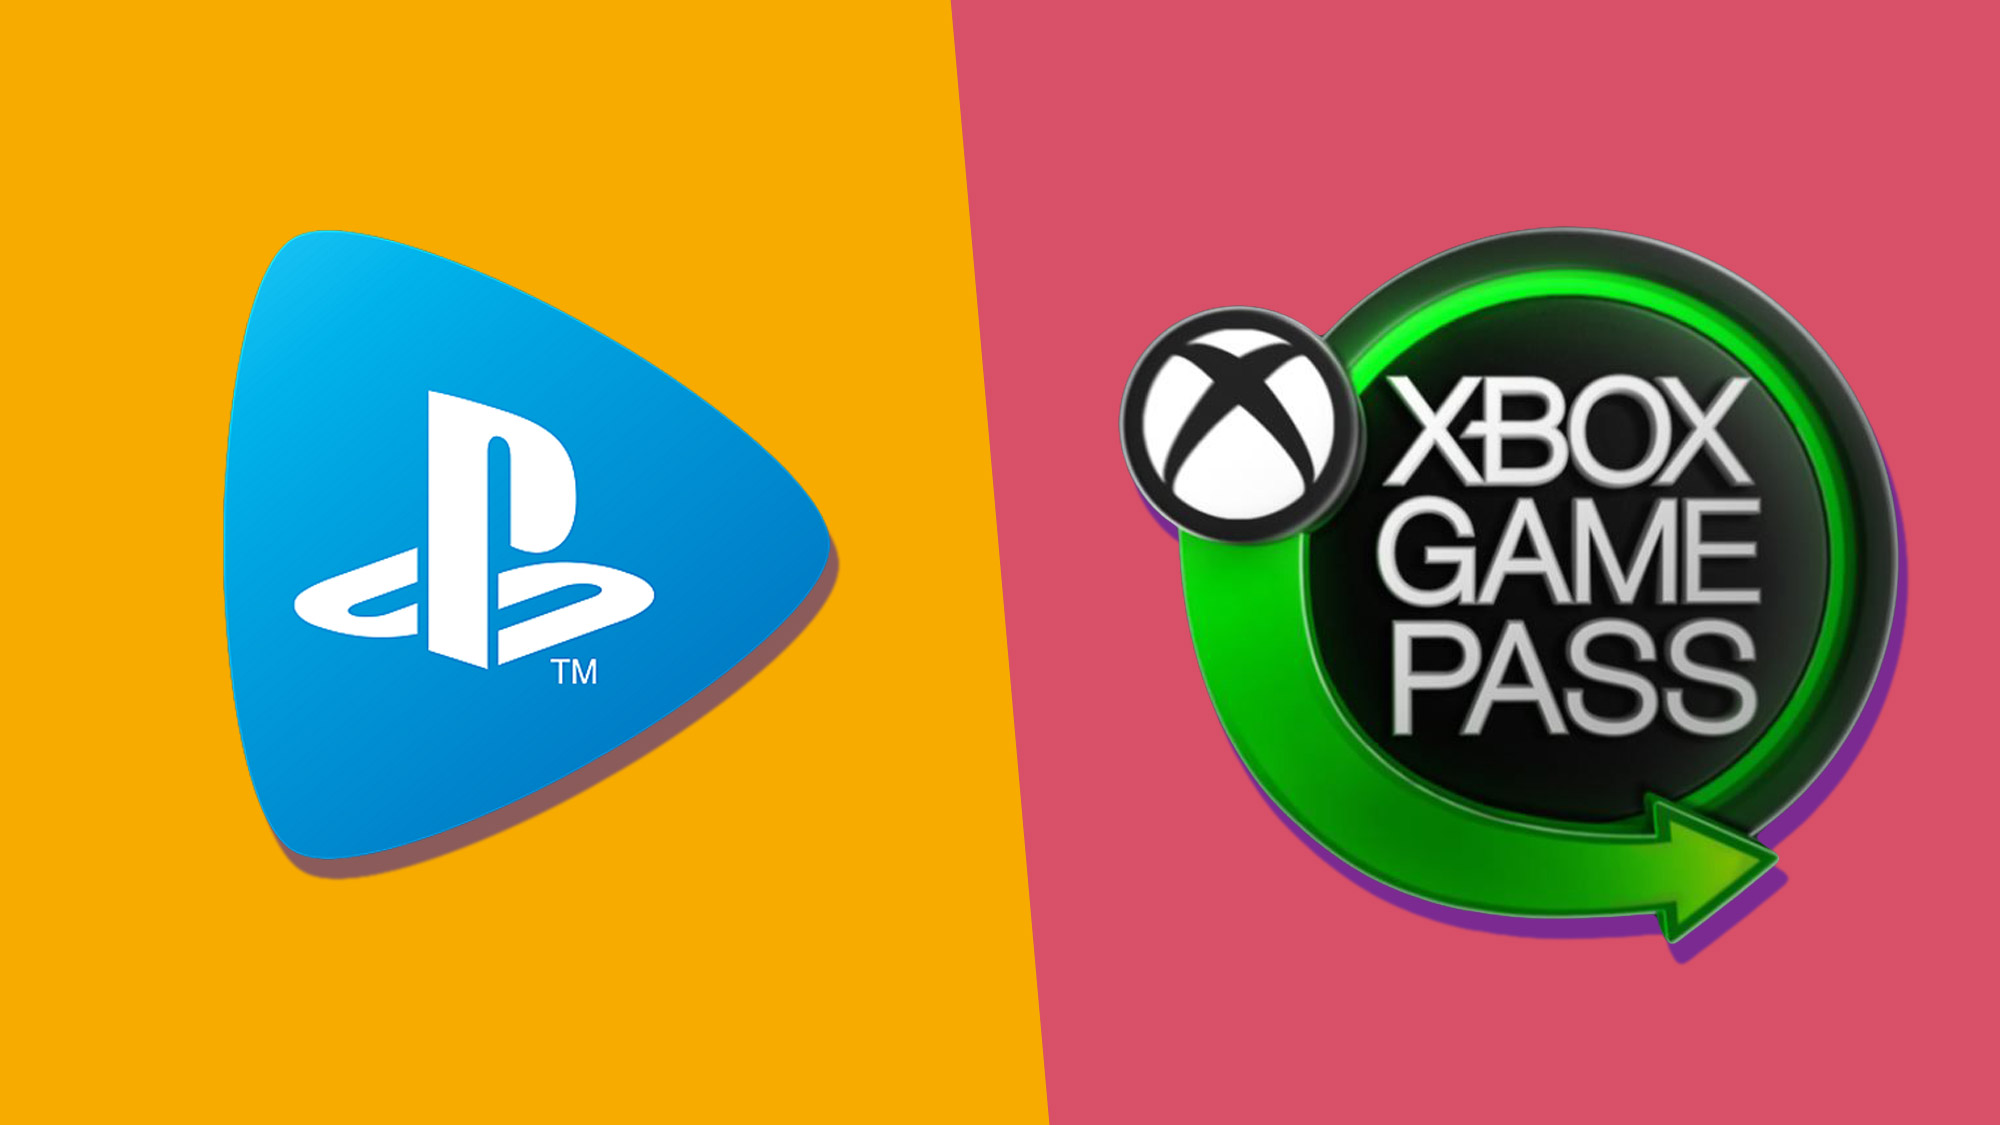 Xbox Game Pass and PlayStation Now logos